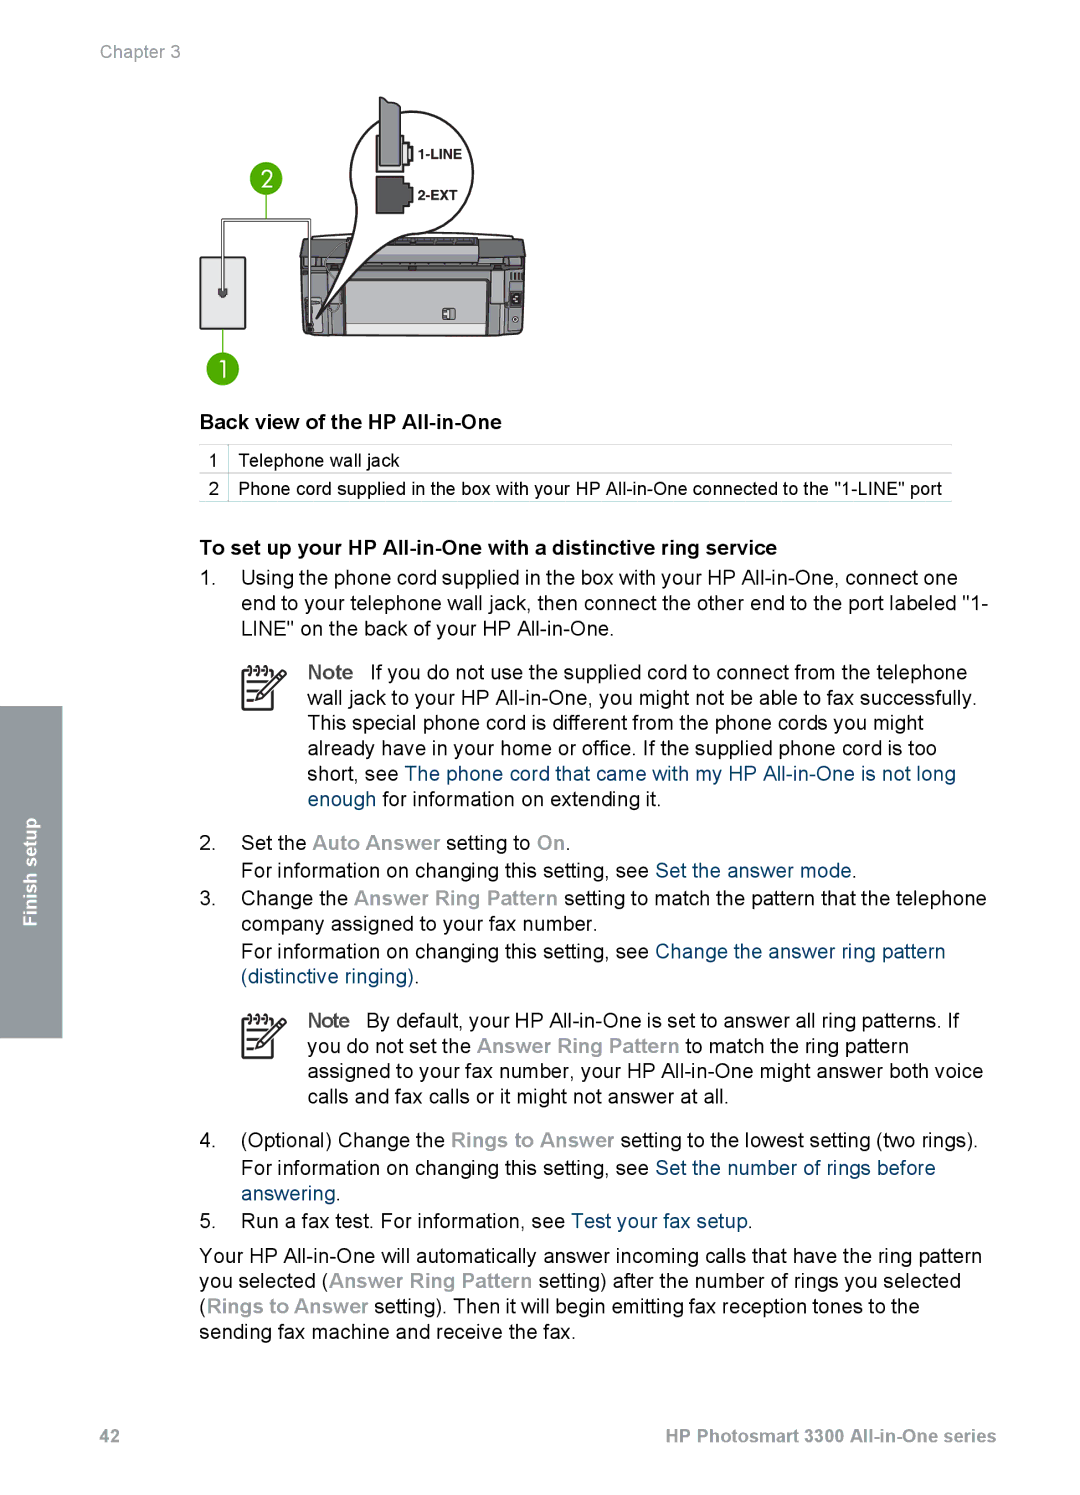 HP 3300 manual To set up your HP All-in-One with a distinctive ring service 